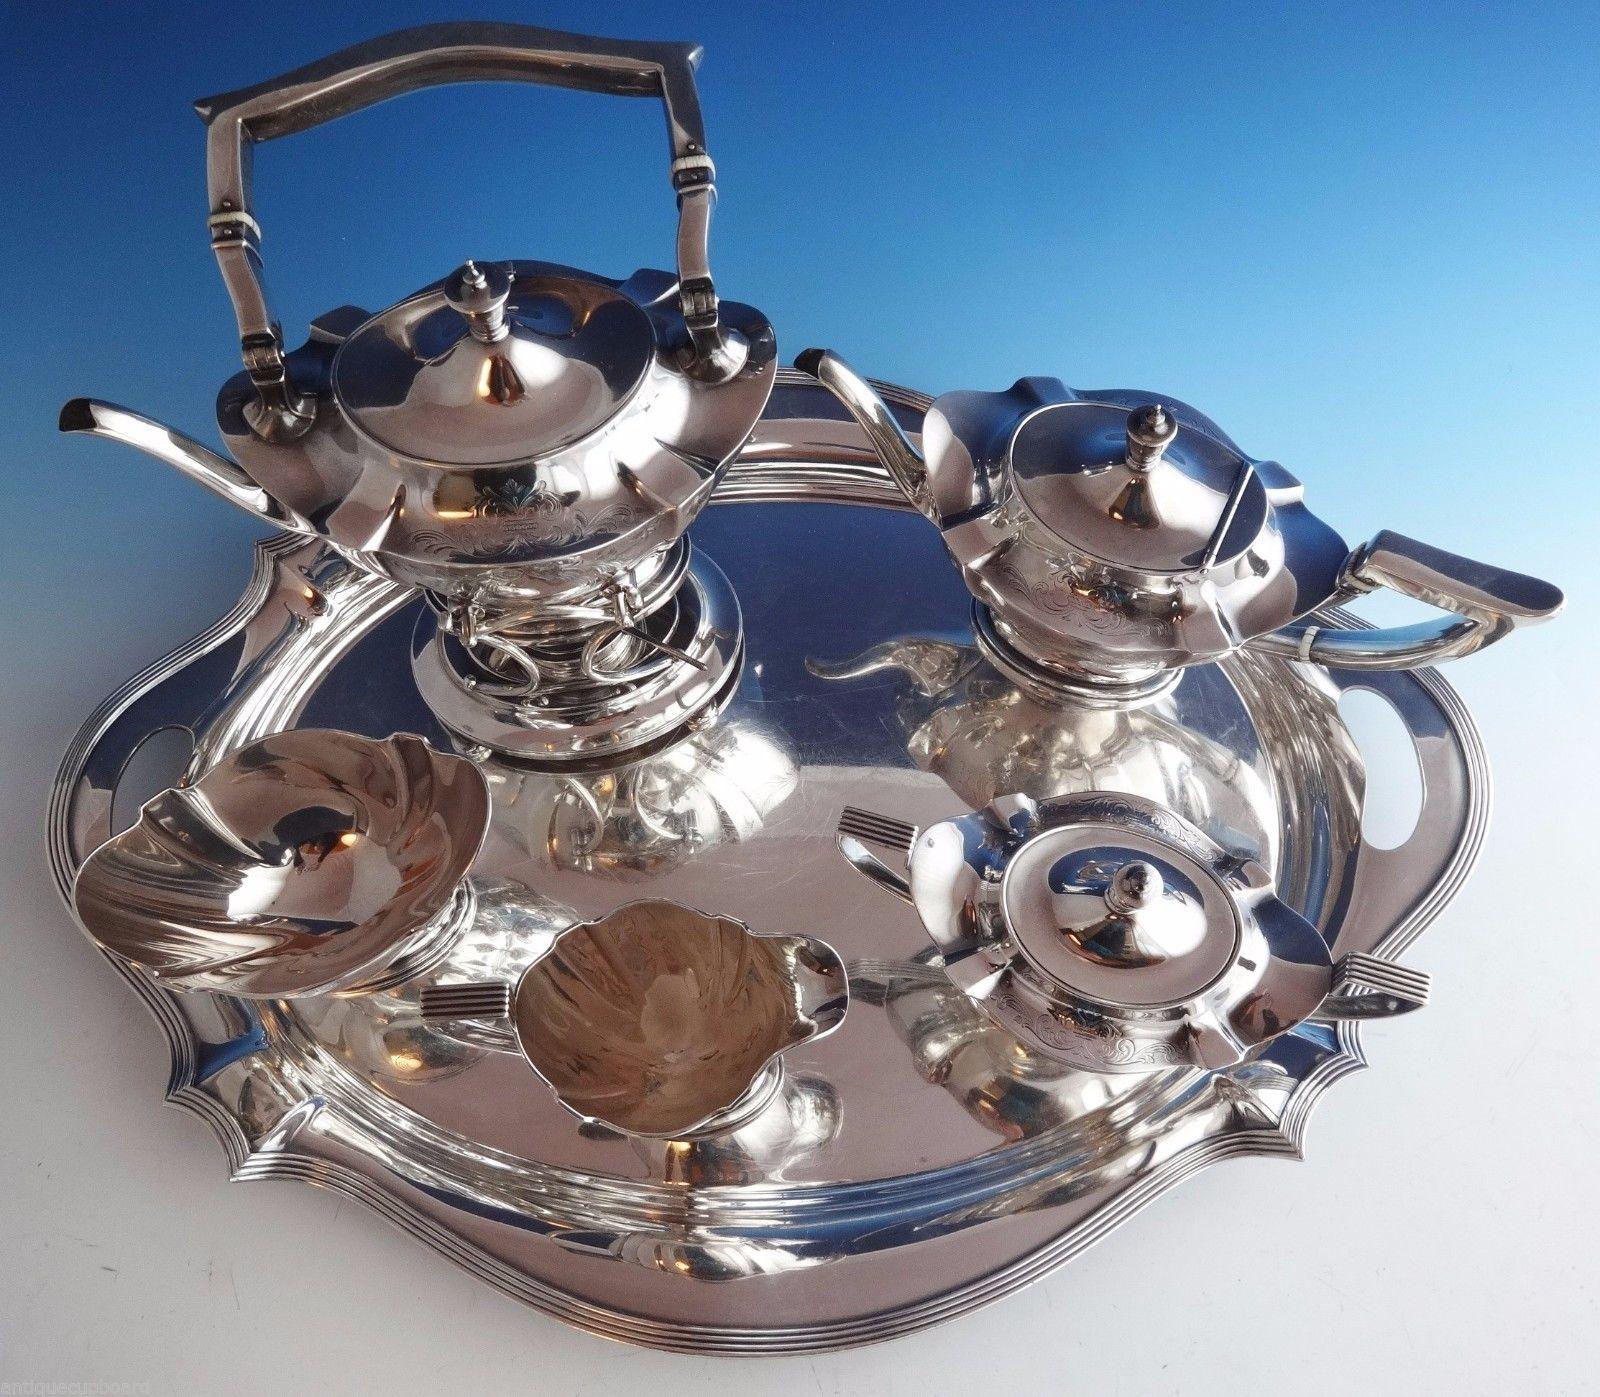 Plymouth Engraved by Gorham
Impressive Plymouth Engraved by Gorham sterling silver 5-piece tea set with silver plate tray. It features beautiful engraved scrollwork. The set includes:

Kettle on Stand: Marked with #A2446, holds 2 3/4 pints, and